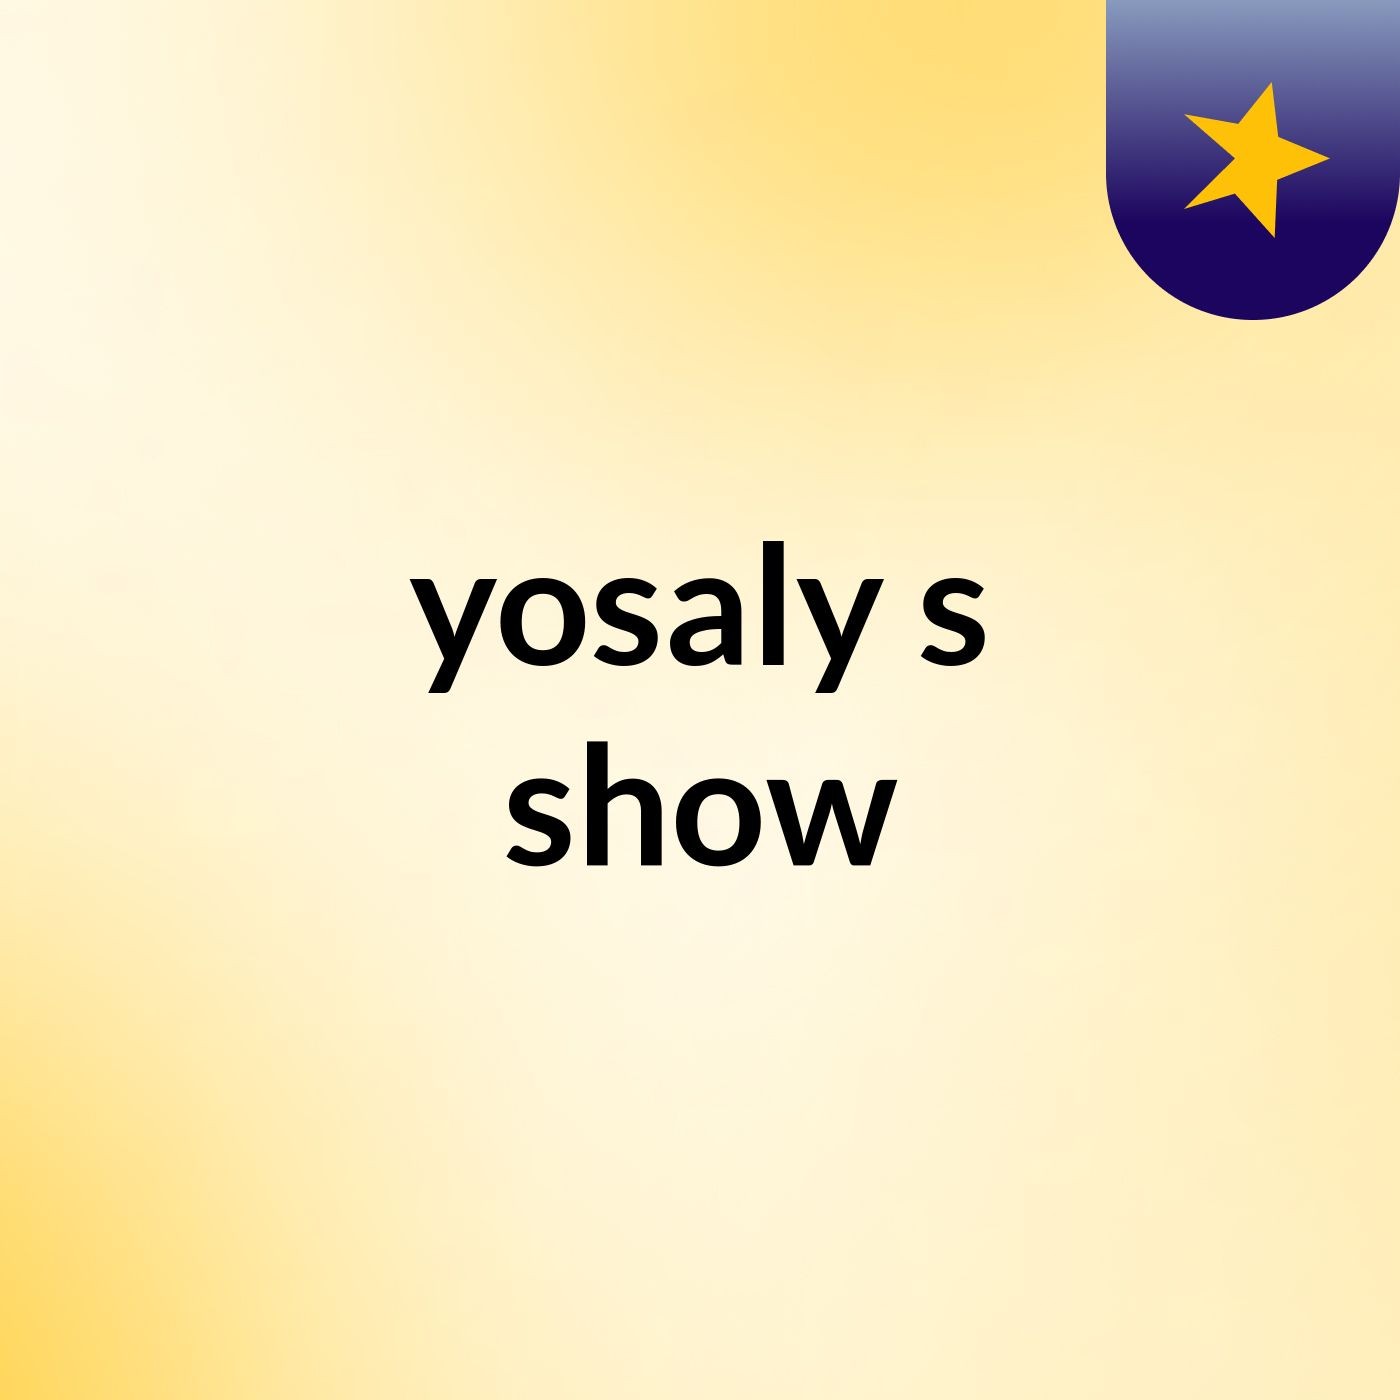 yosaly's show